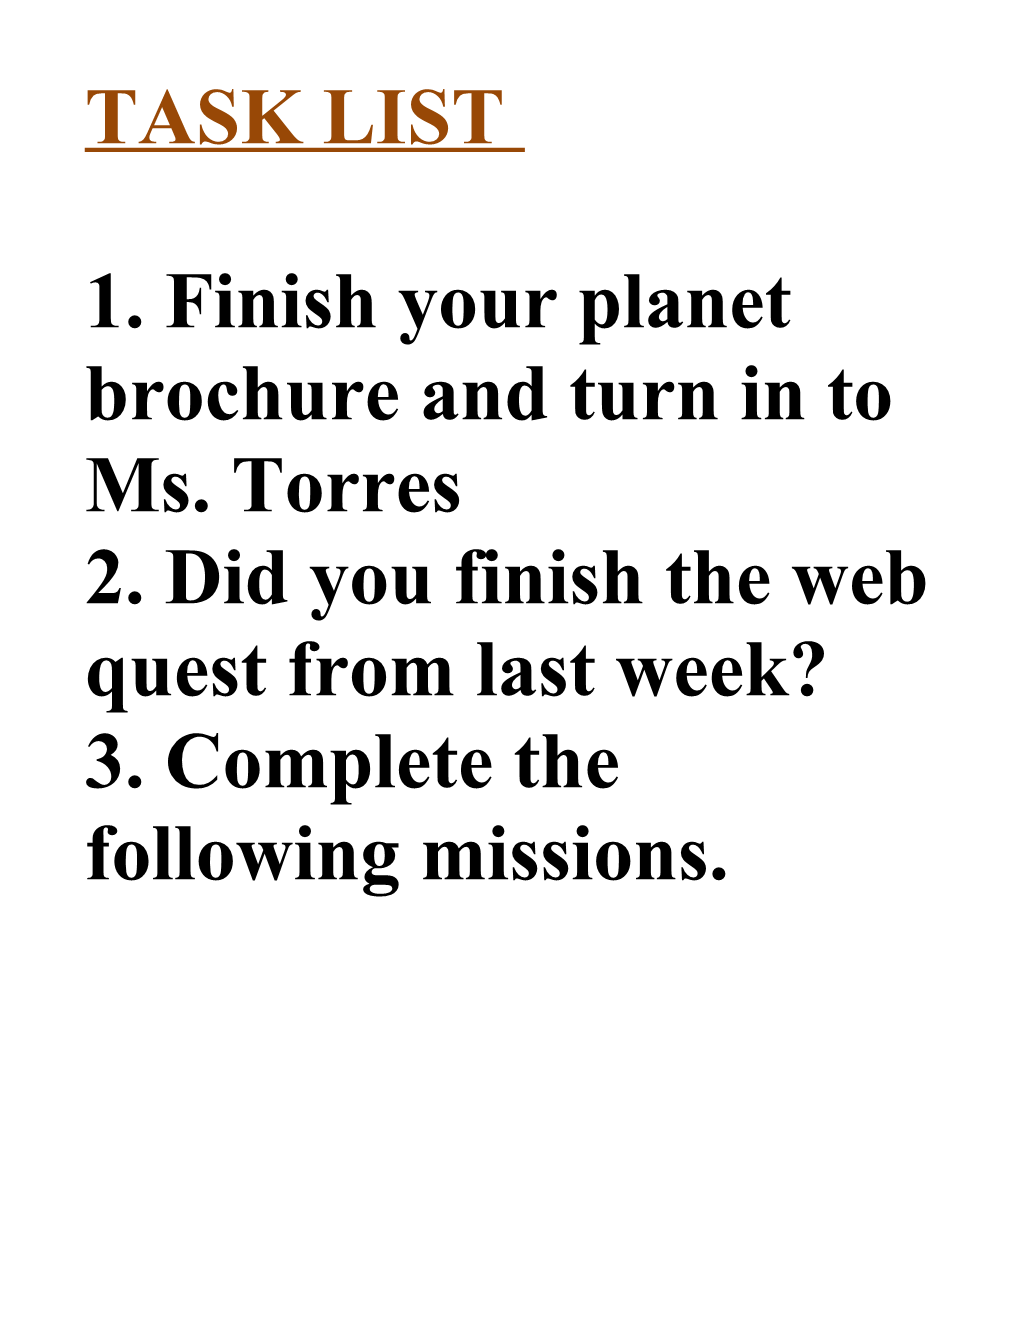 1. Finish Your Planet Brochure and Turn in to Ms. Torres